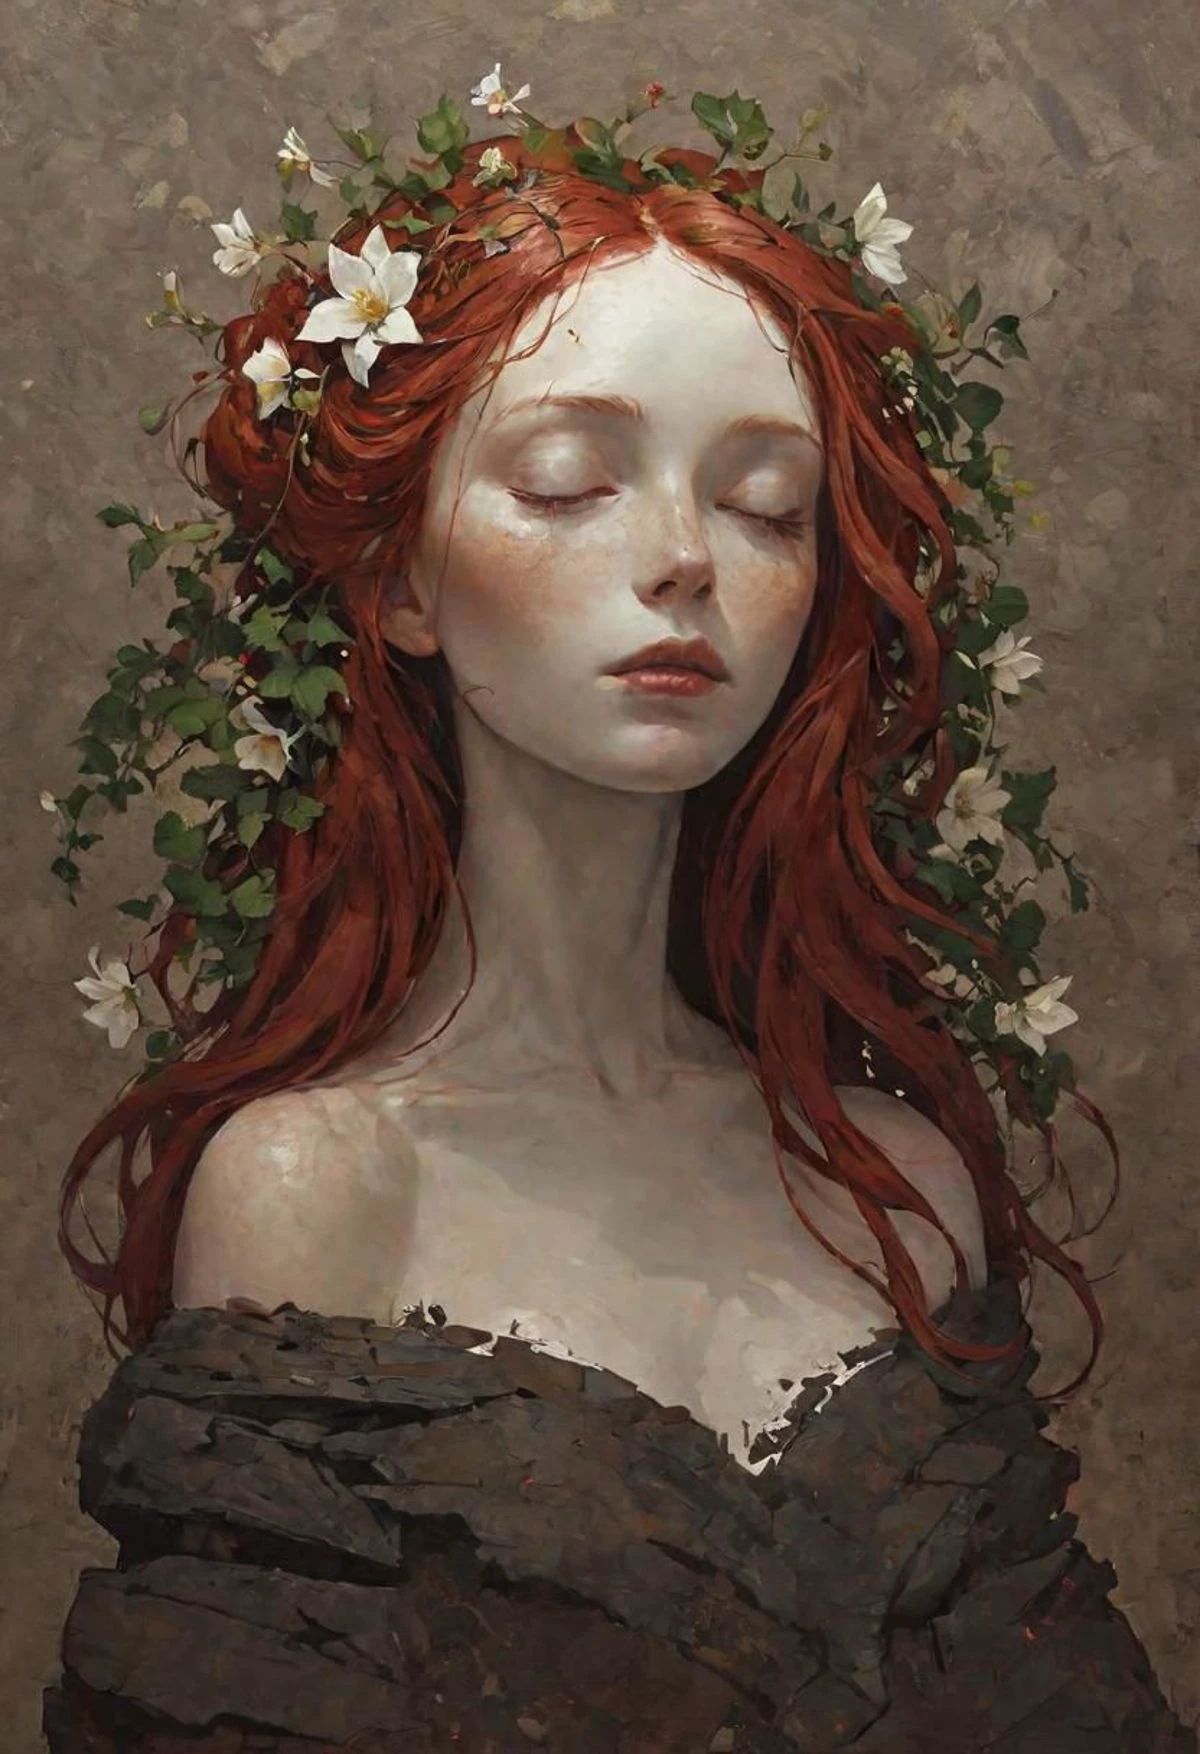 by alena aenami, ((beautiful:1.4)), (masterpiece, best quality:1.4) , in the style of nicola samori, ((silhouette of a woman made of stone)), red hair, porcelain skin, white skin, perfect head, perfect face, Greg Rutkowski, magical environment, flowers, vines on the body, perfect anatomy, slim body, intricately detailed, bokeh, perfect balanced, deep fine borders, artistic photorealism, smooth, great masterwork by head of prompt engineering, ethereal background, difussed lights,